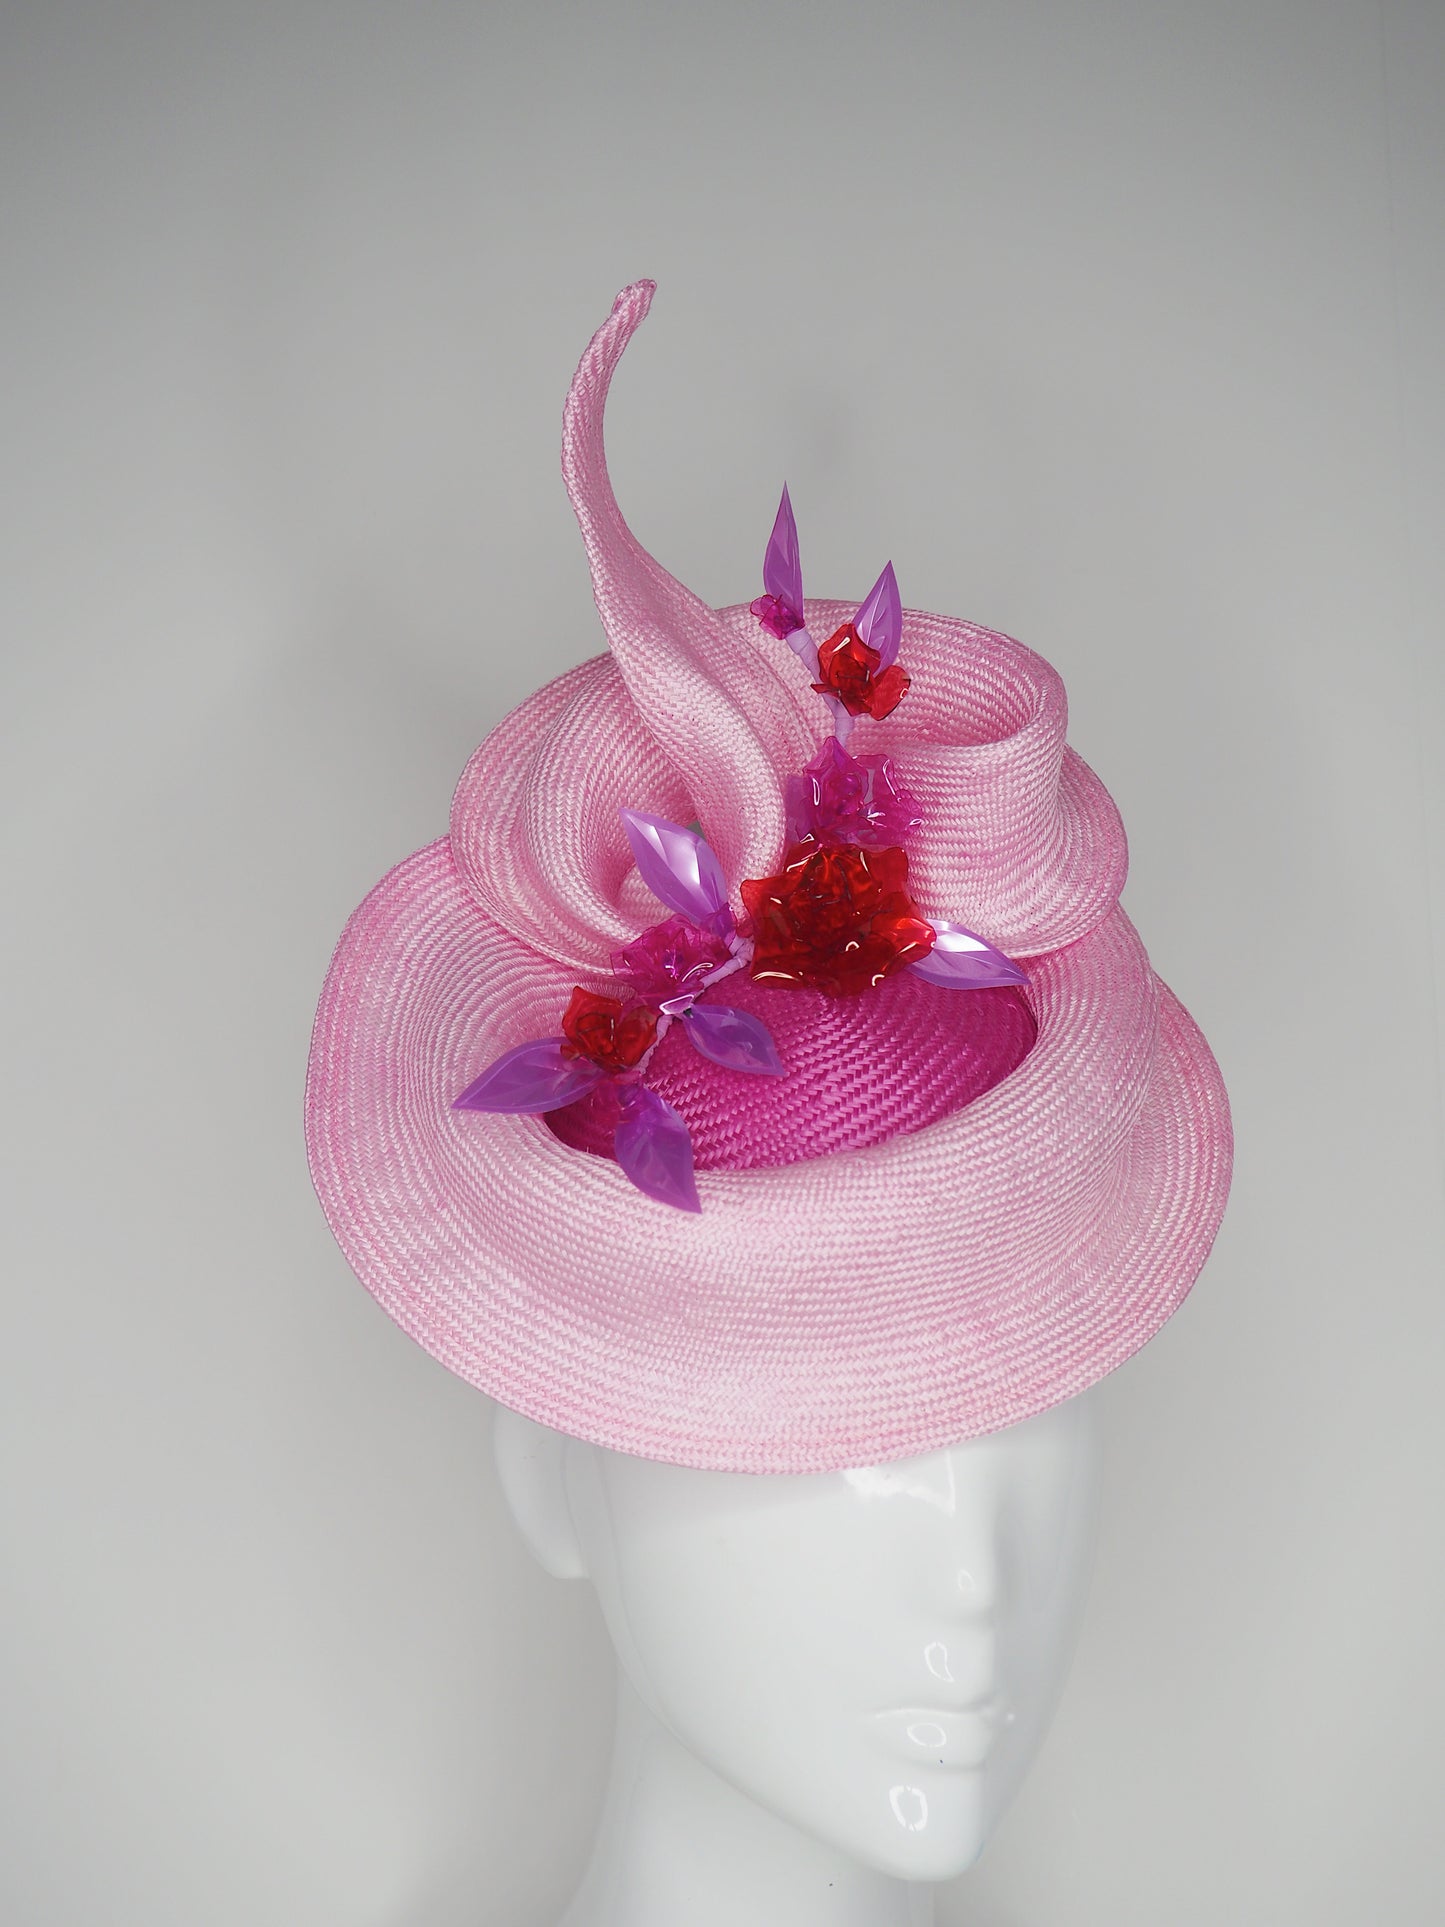 Realm of flowers - Magenta and baby pink parisissal swirl headpiece with crystoform flowers